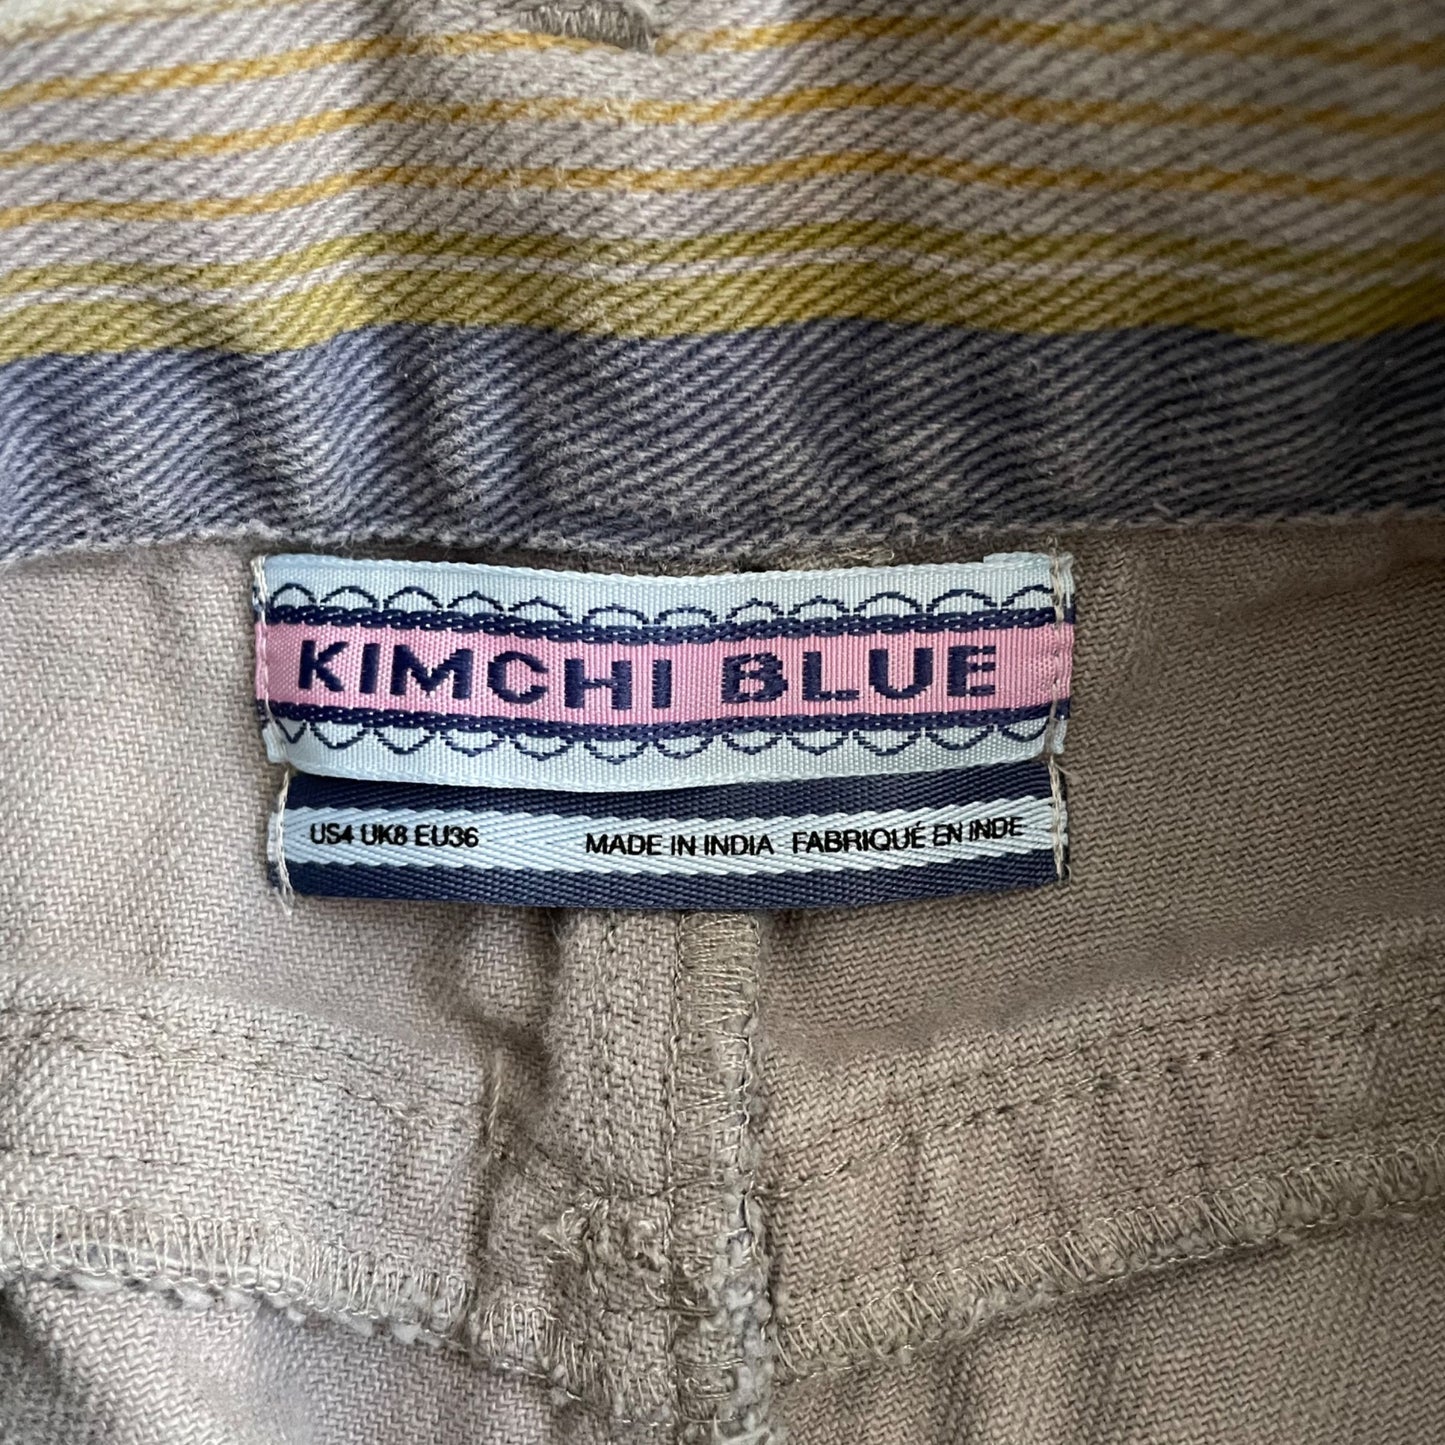 Urban Outfitters Kimchi Blue Striped Embroidered Pleated Jeans Women's Size 4